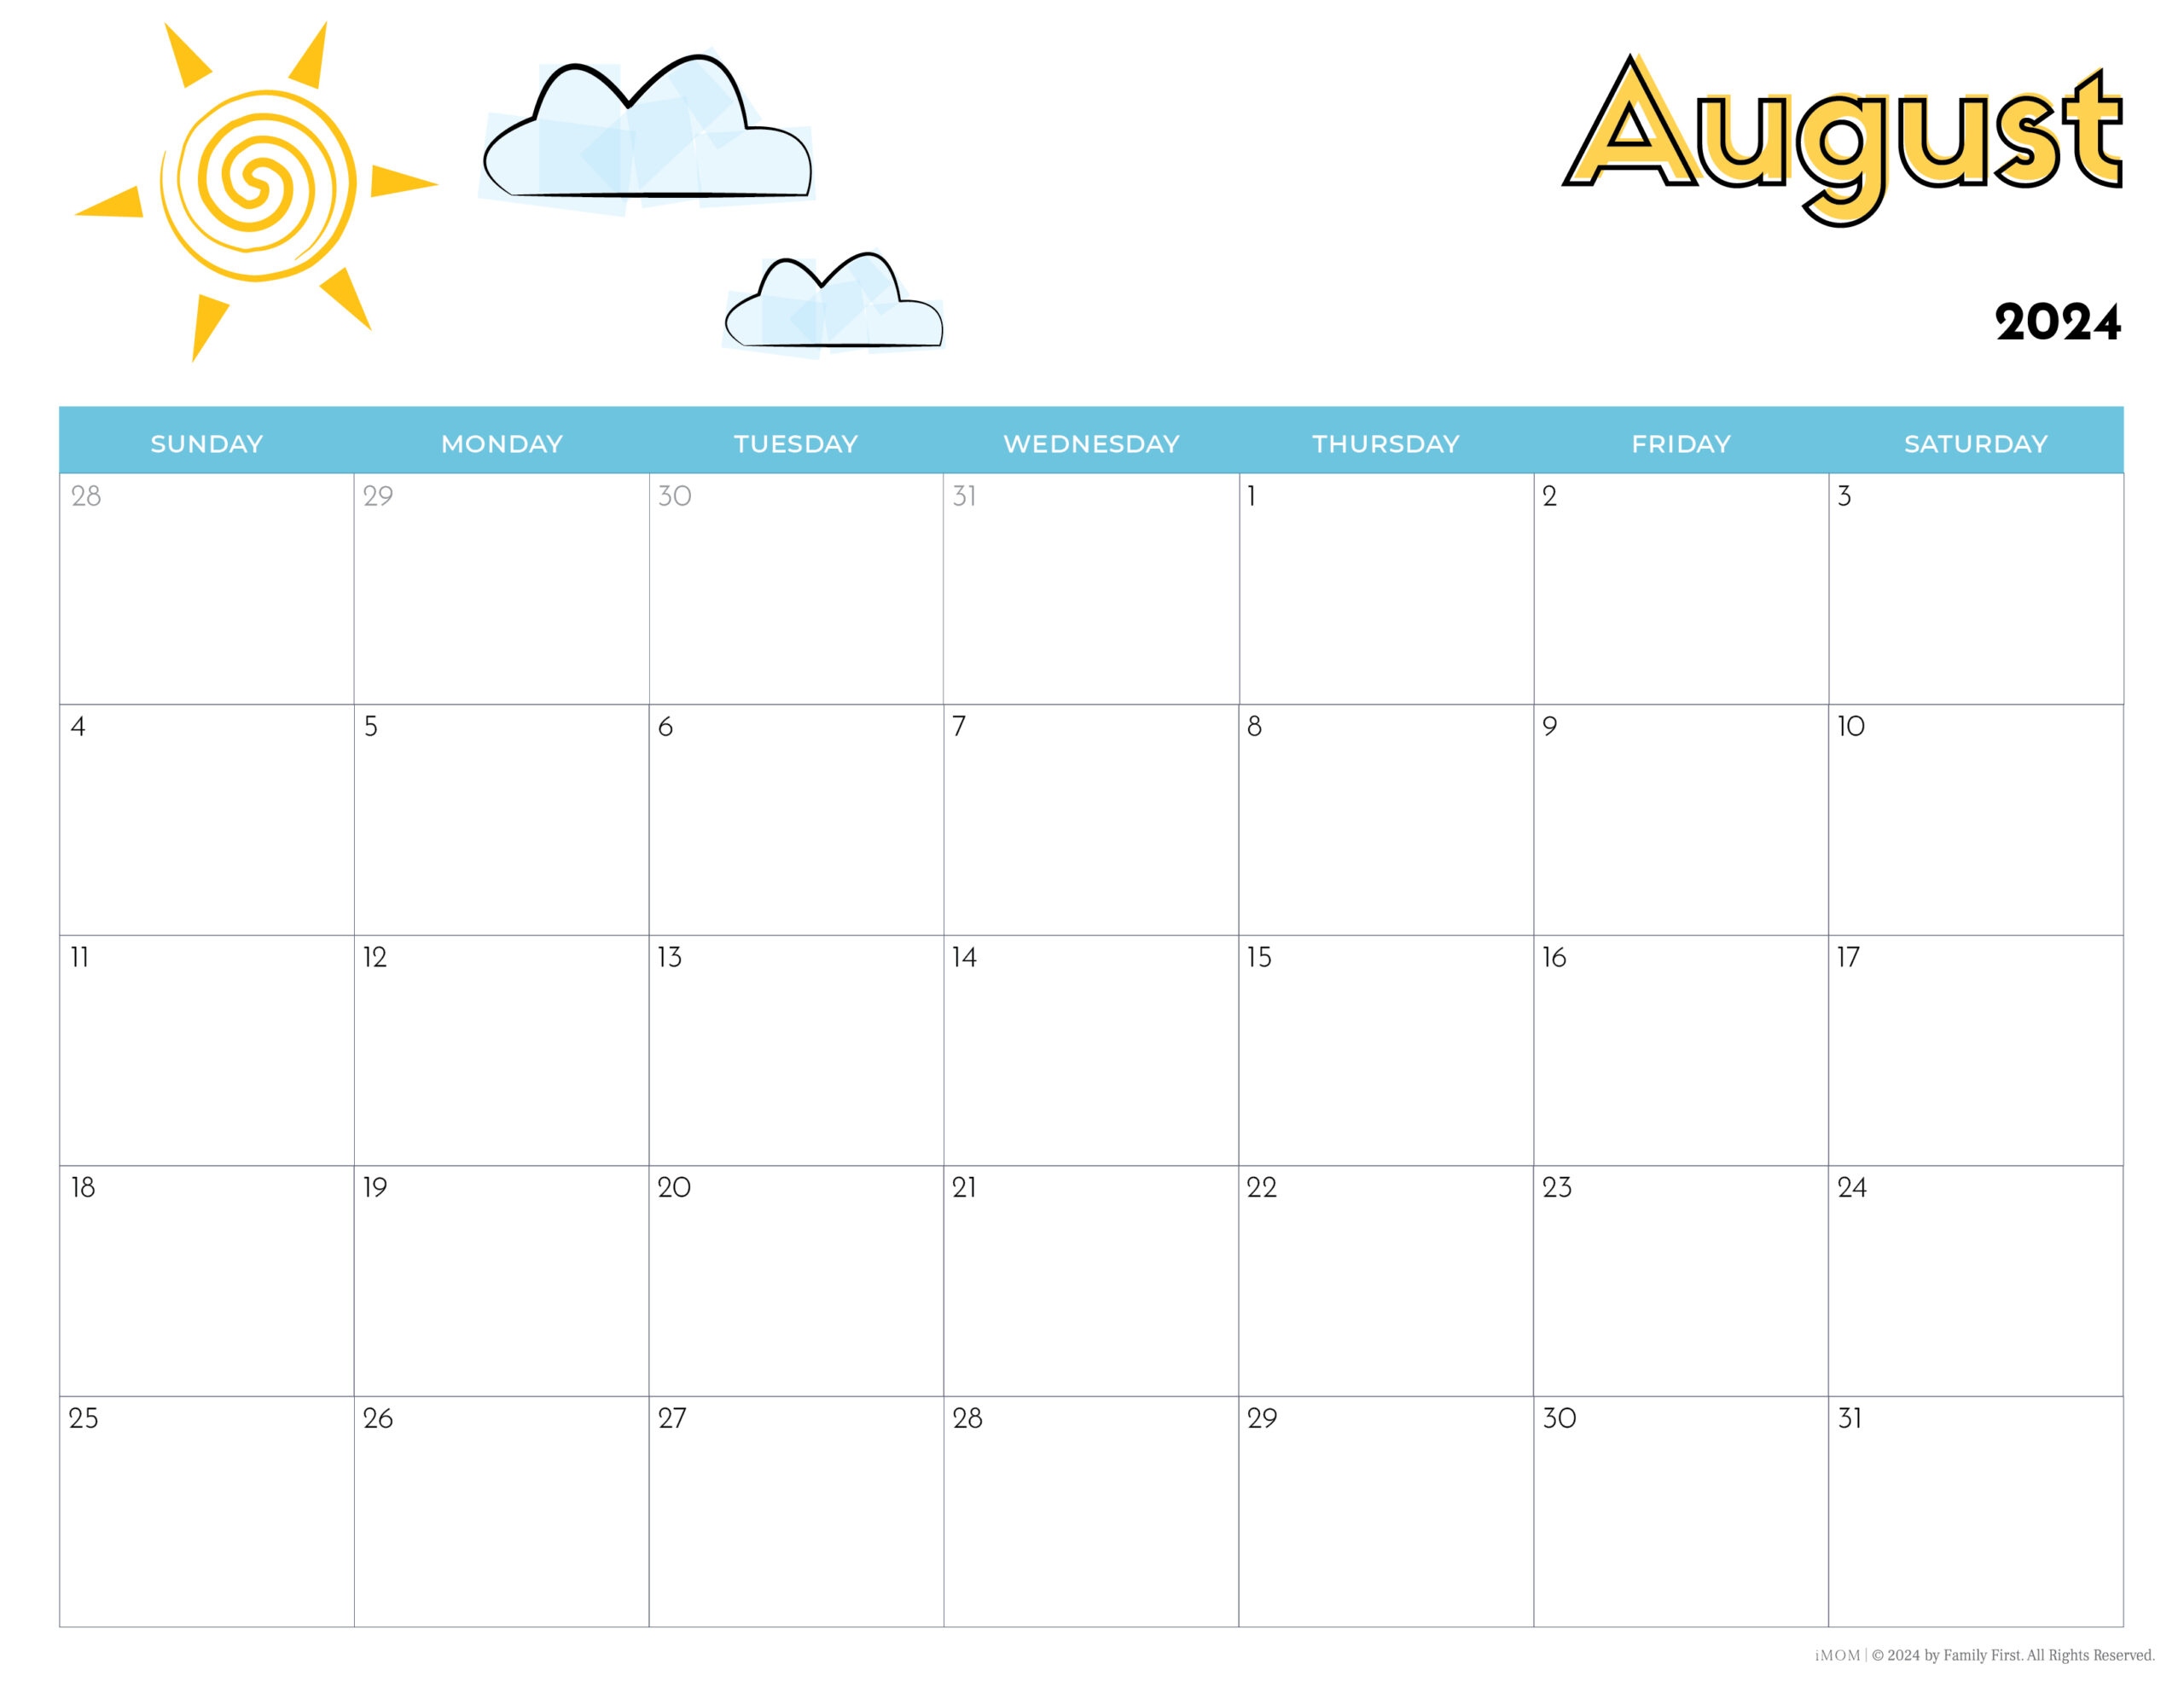 2024 Printable Calendars For Kids - Imom within Free Printable Calendar 2024 For Elementary